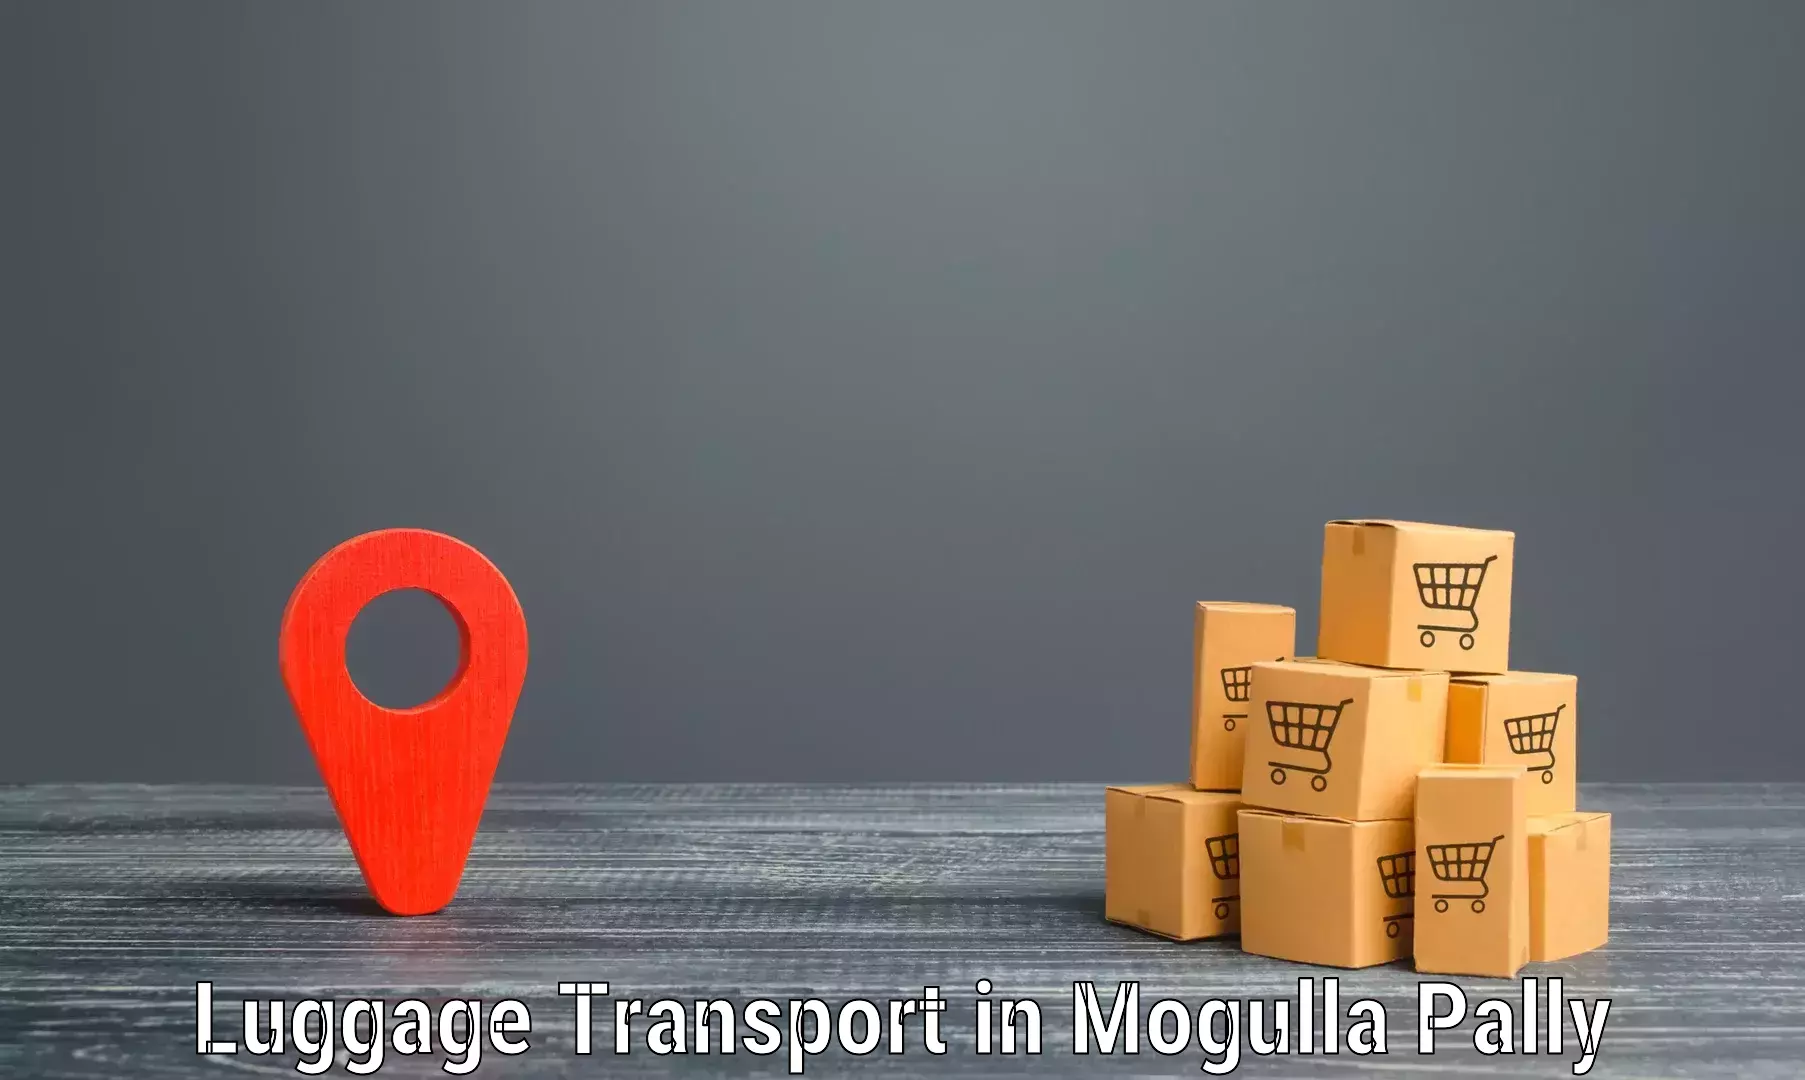 Luggage transport solutions in Mogulla Pally